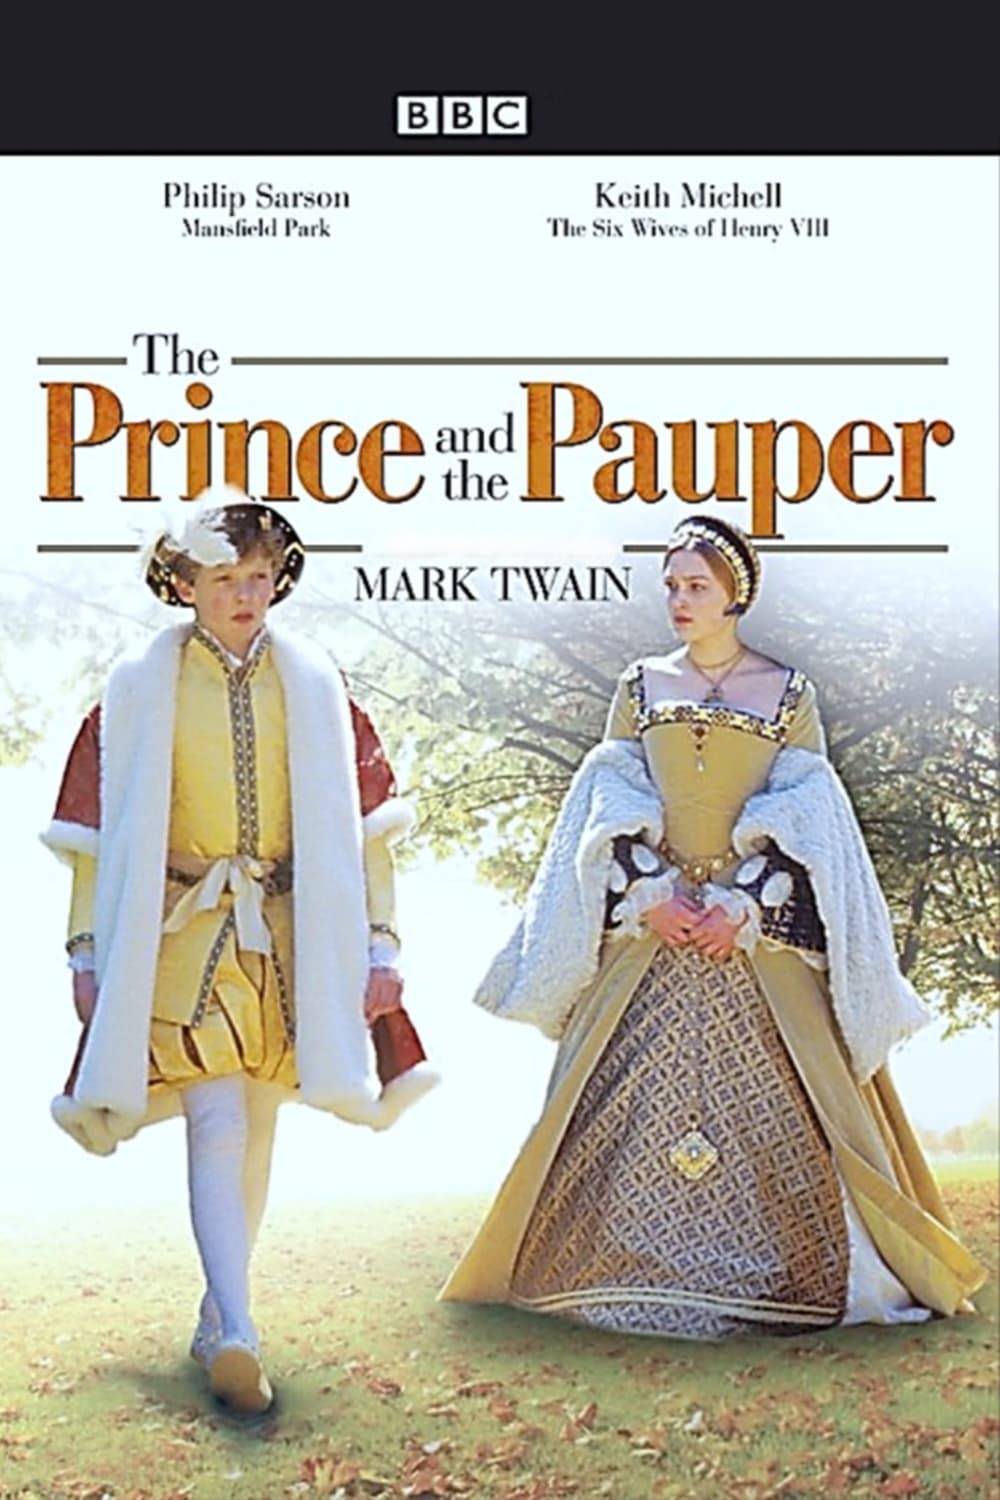 The Prince and the Pauper (1996)